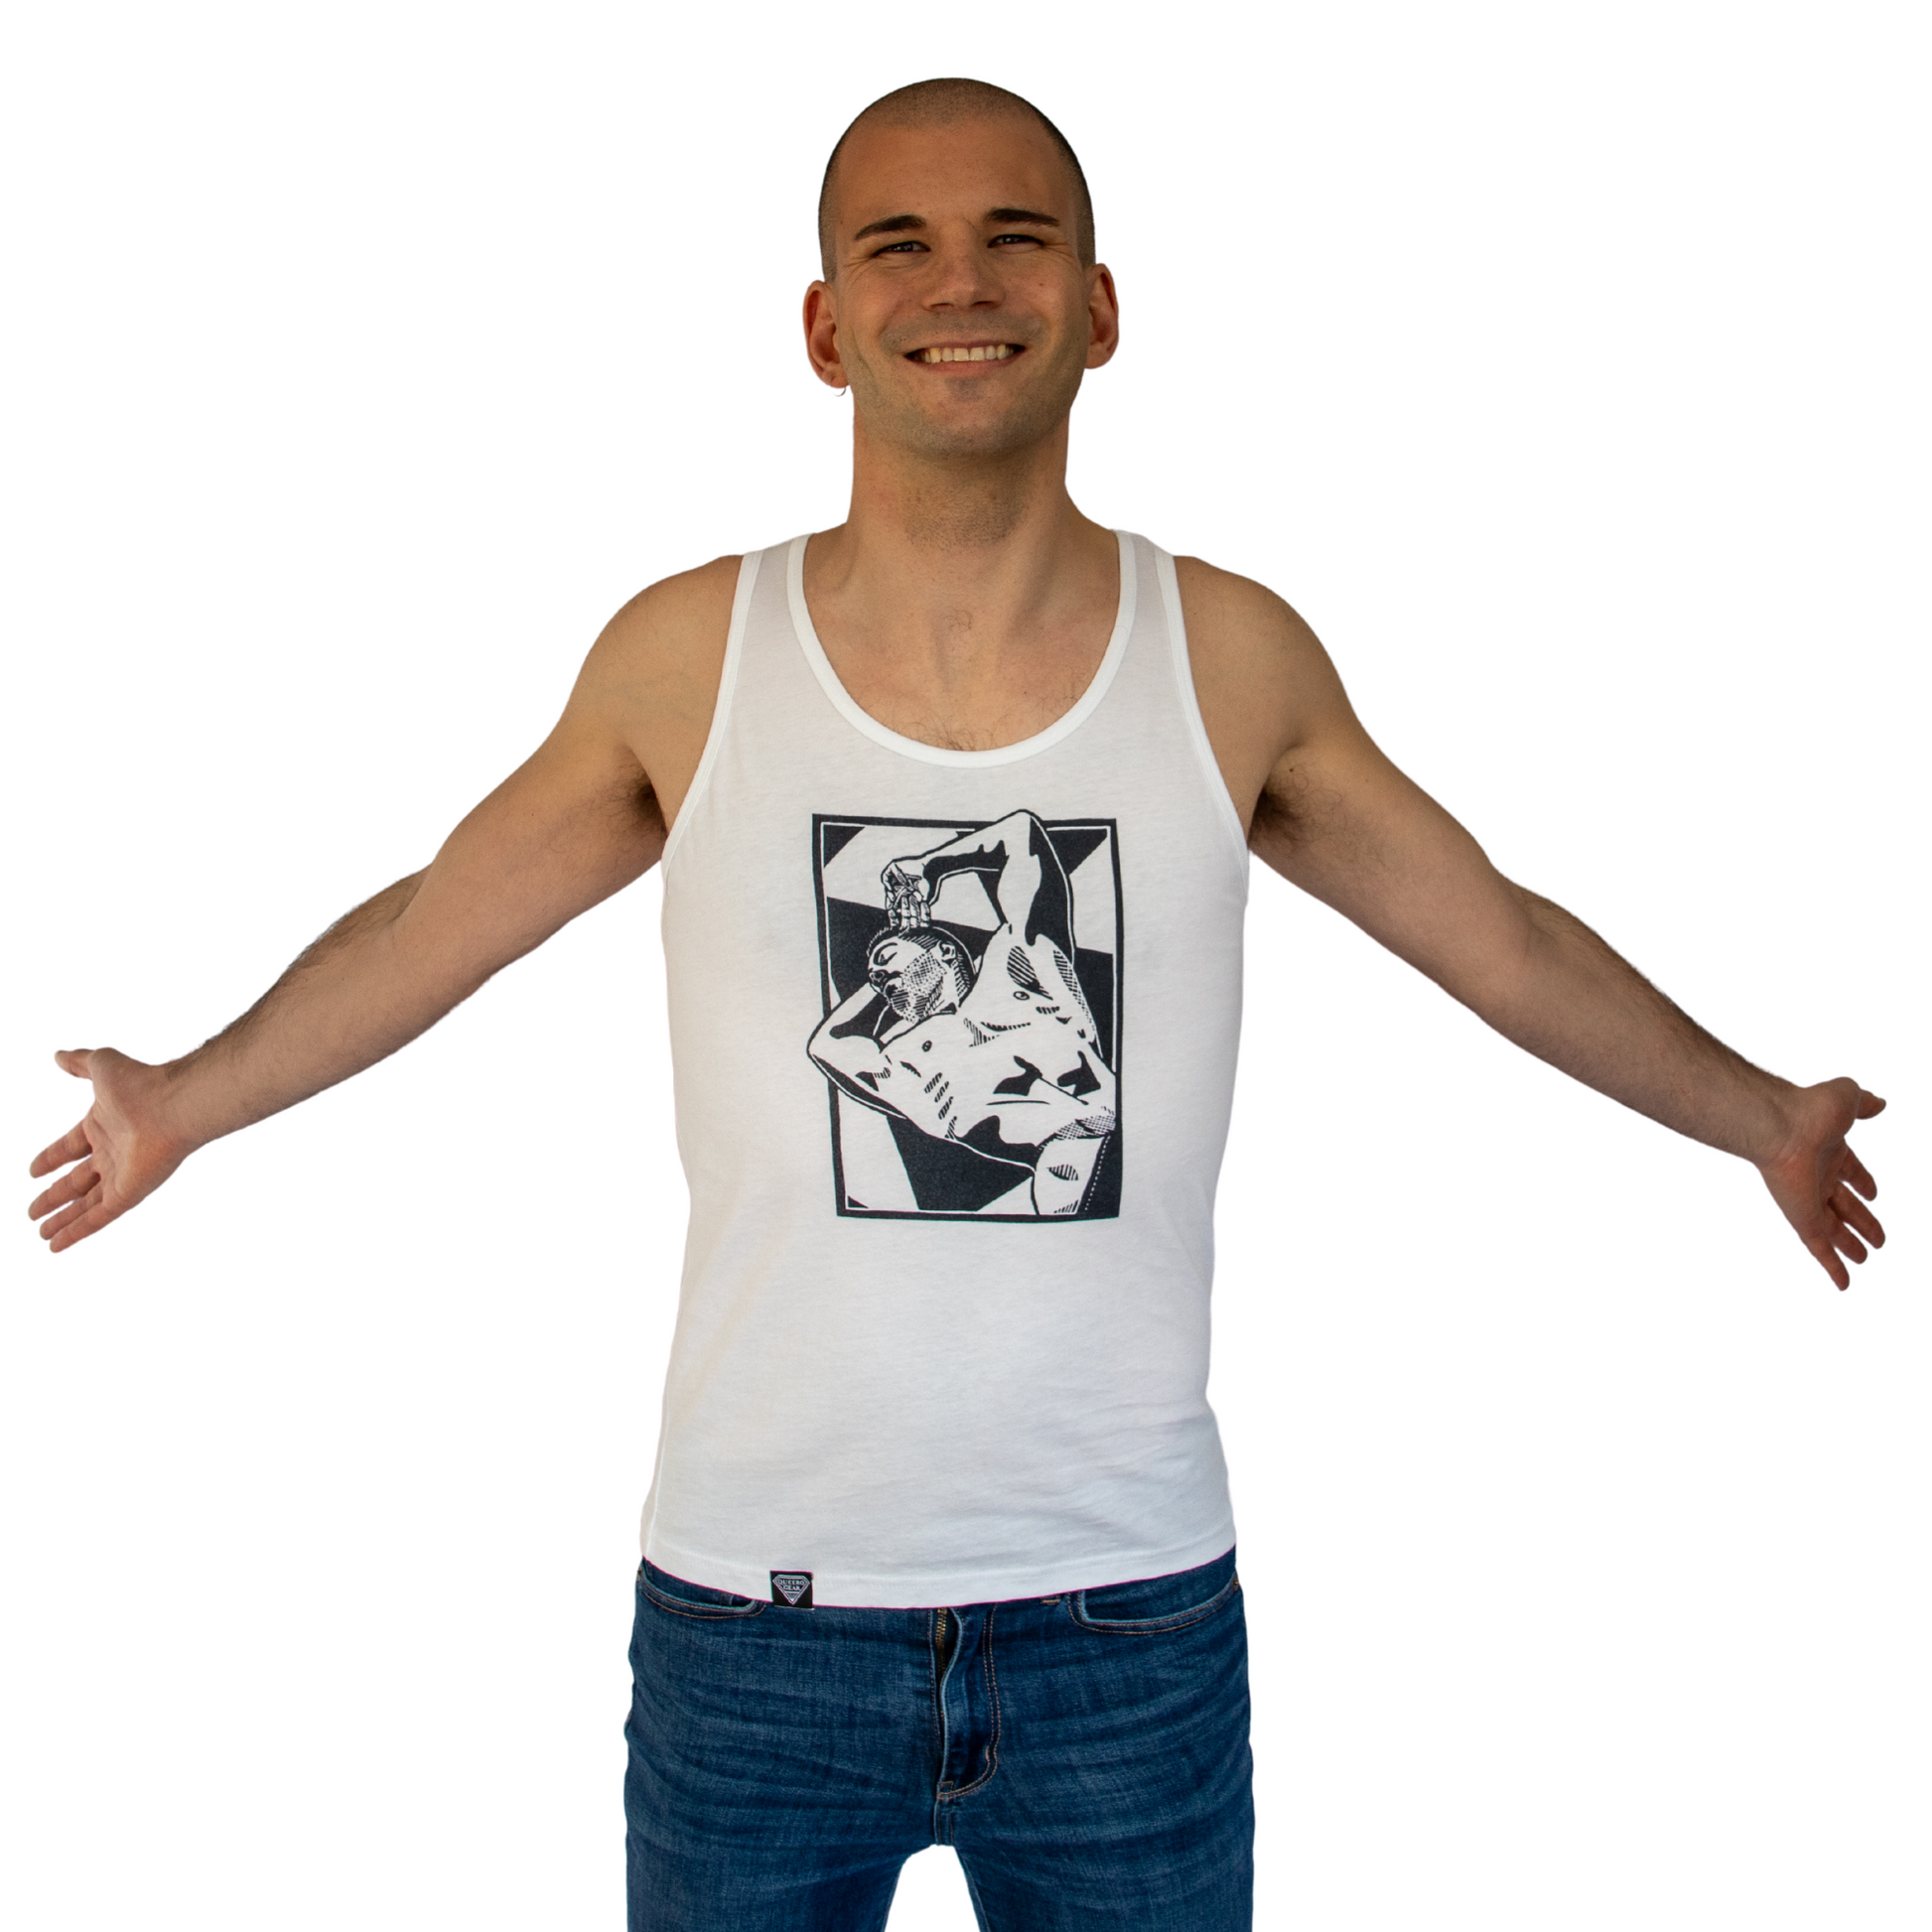 Laid Back Tank Top Queero Gear